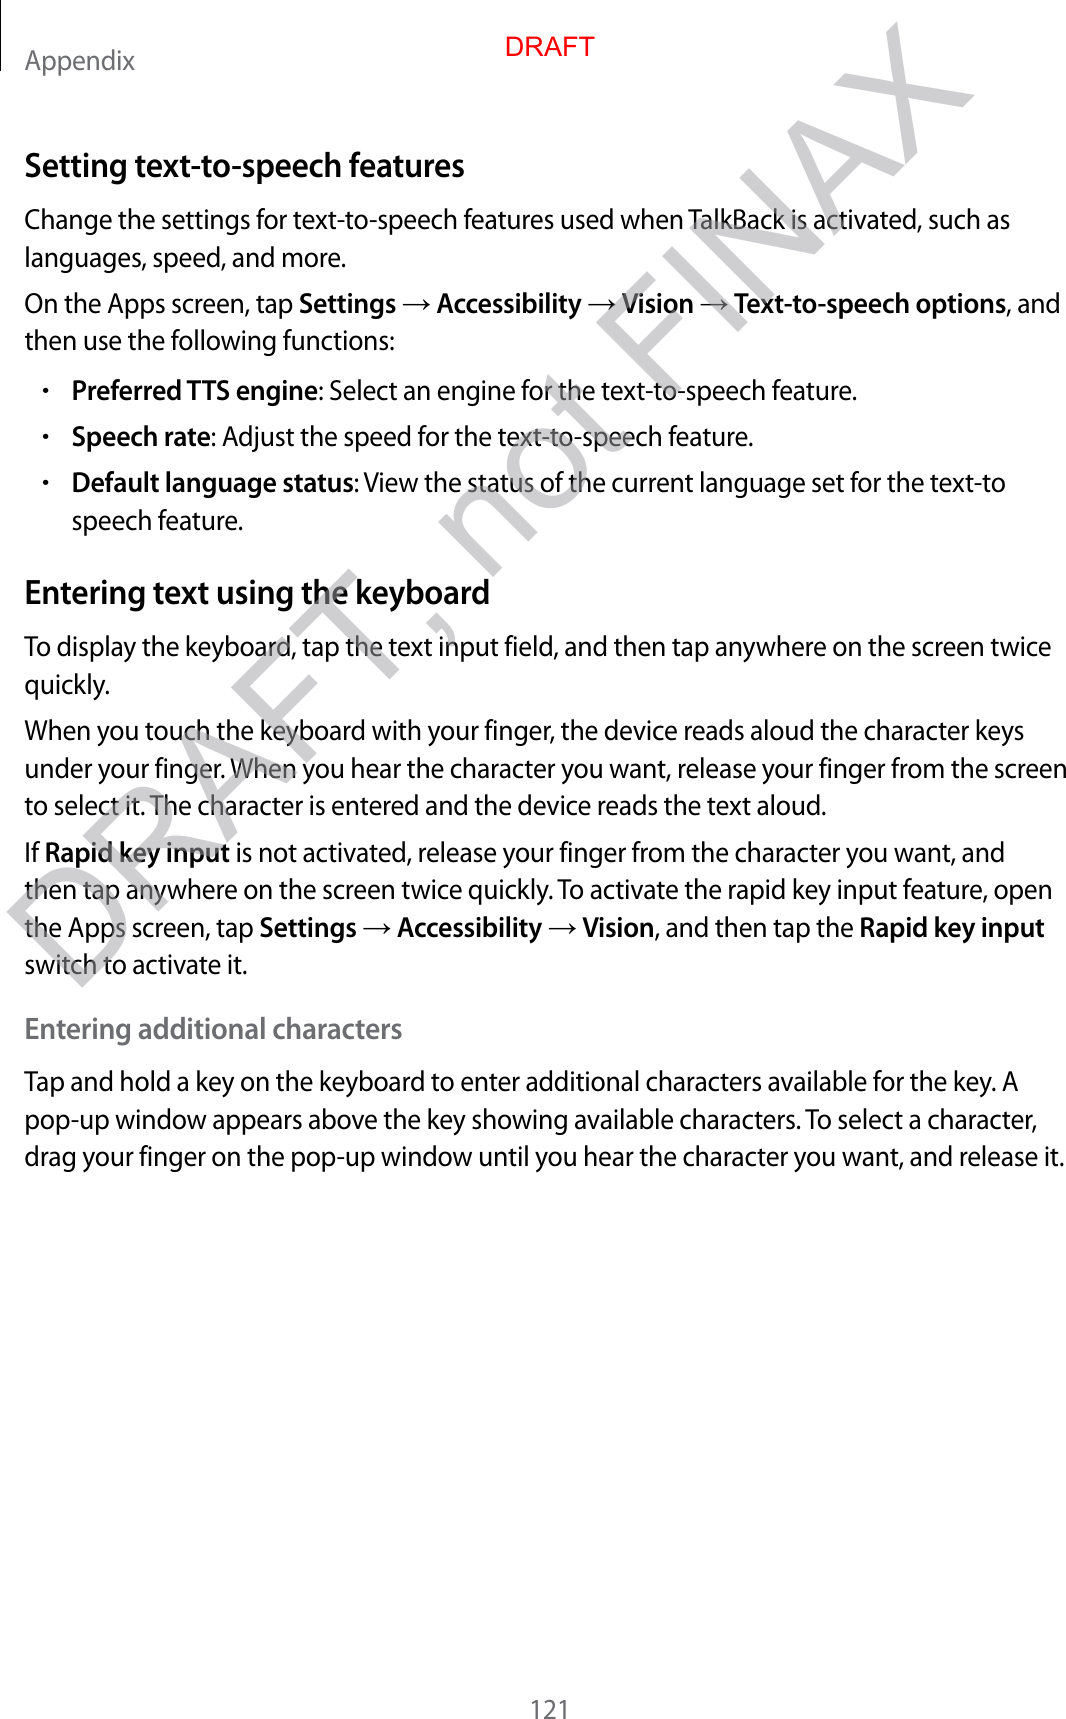 Appendix121Setting text-to-speech featuresChange the settings for text-to-speech features used when TalkBack is activated, such as languages, speed, and more.On the Apps screen, tap Settings  Accessibility  Vision  Text-to-speech options, and then use the following functions:•Preferred TTS engine: Select an engine for the text-to-speech feature.•Speech rate: Adjust the speed for the text-to-speech feature.•Default language status: View the status of the current language set for the text-to speech feature.Entering text using the keyboardTo display the keyboard, tap the text input field, and then tap anywhere on the screen twice quickly.When you touch the keyboard with your finger, the device reads aloud the character keys under your finger. When you hear the character you want, release your finger from the screen to select it. The character is entered and the device reads the text aloud.If Rapid key input is not activated, release your finger from the character you want, and then tap anywhere on the screen twice quickly. To activate the rapid key input feature, open the Apps screen, tap Settings  Accessibility  Vision, and then tap the Rapid key input switch to activate it.Entering additional charactersTap and hold a key on the keyboard to enter additional characters available for the key. A pop-up window appears above the key showing available characters. To select a character, drag your finger on the pop-up window until you hear the character you want, and release it.DRAFTDRAFT, not FINAX